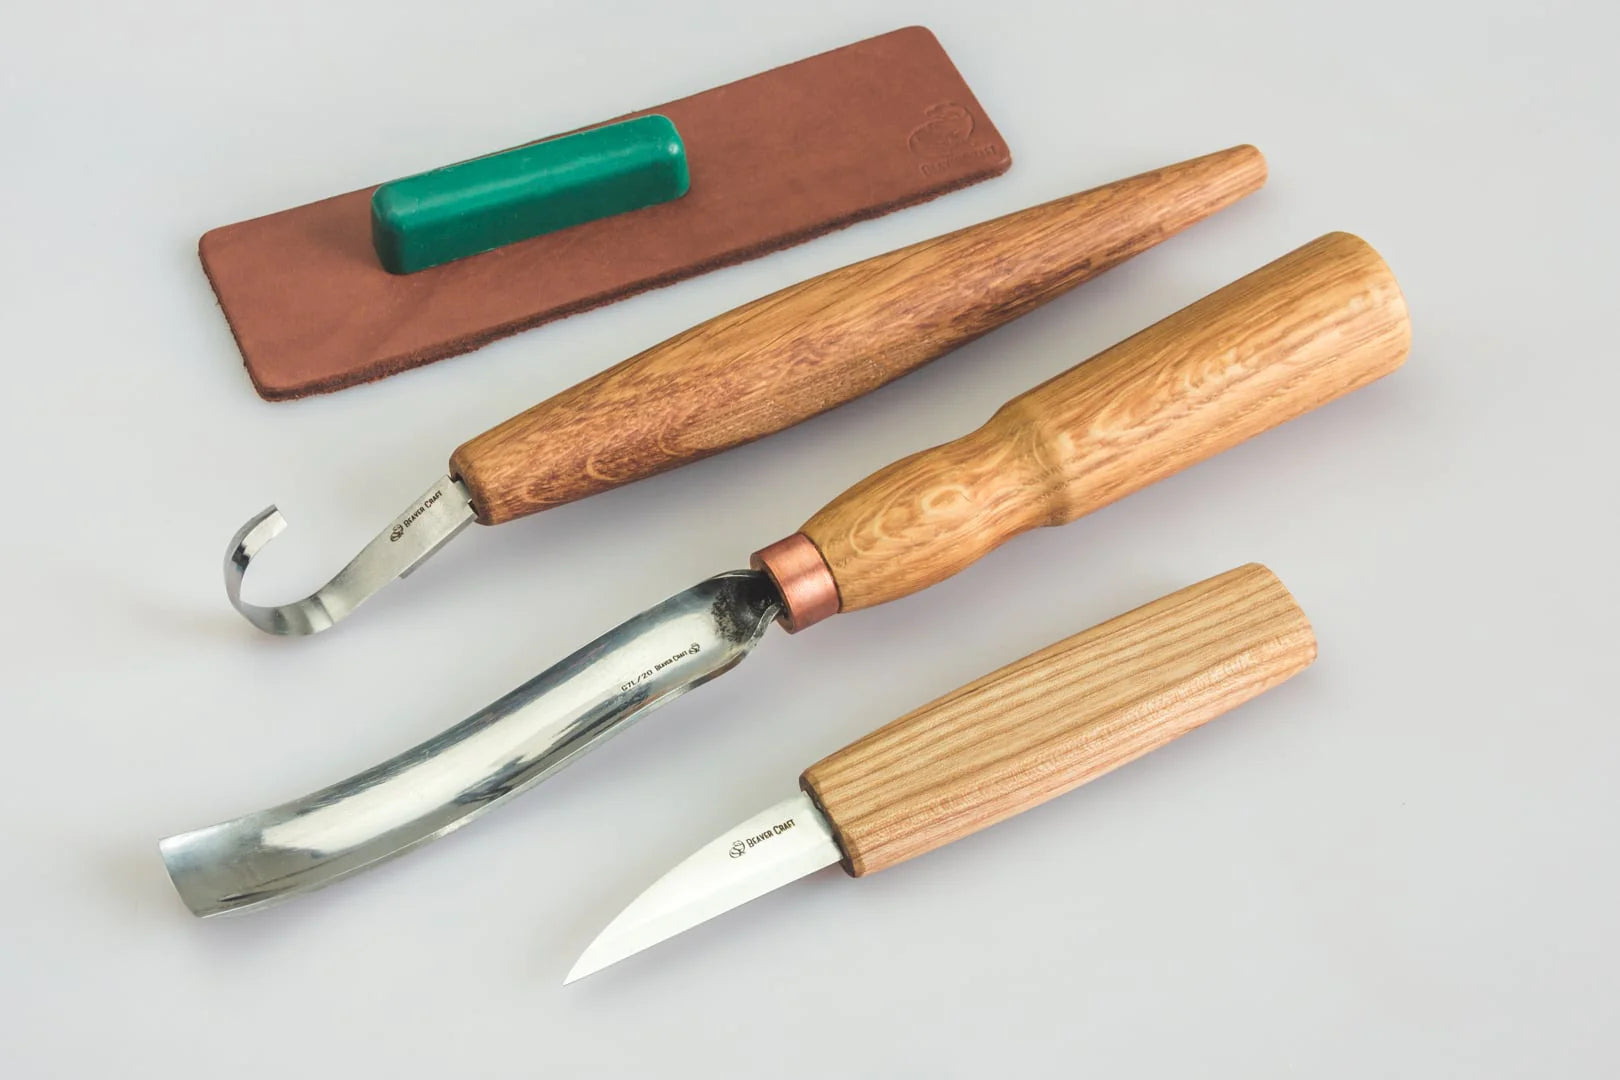 Spoon Carving Kit Wood Carving Tools With Leather Strop